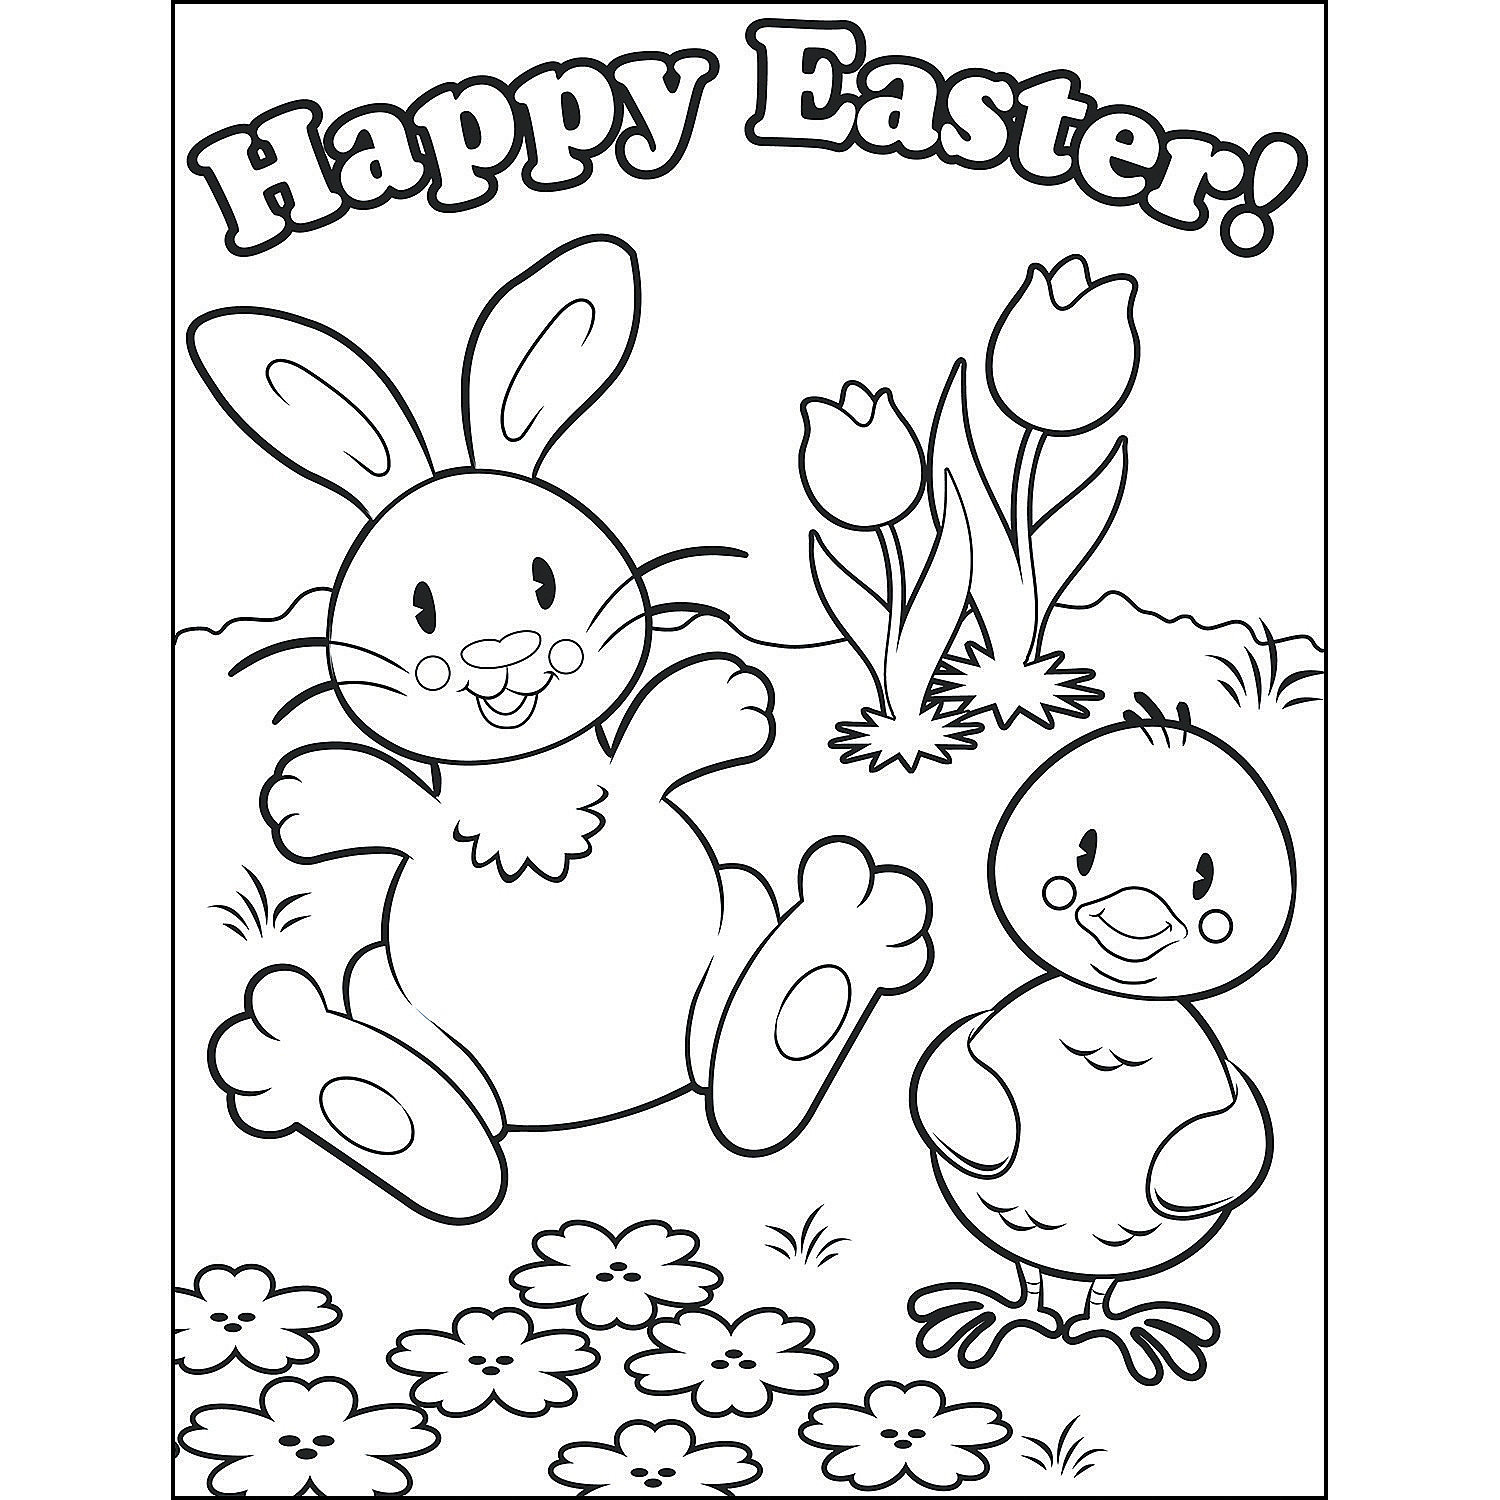 Happy Easter Coloring Pages At GetDrawings Free Download